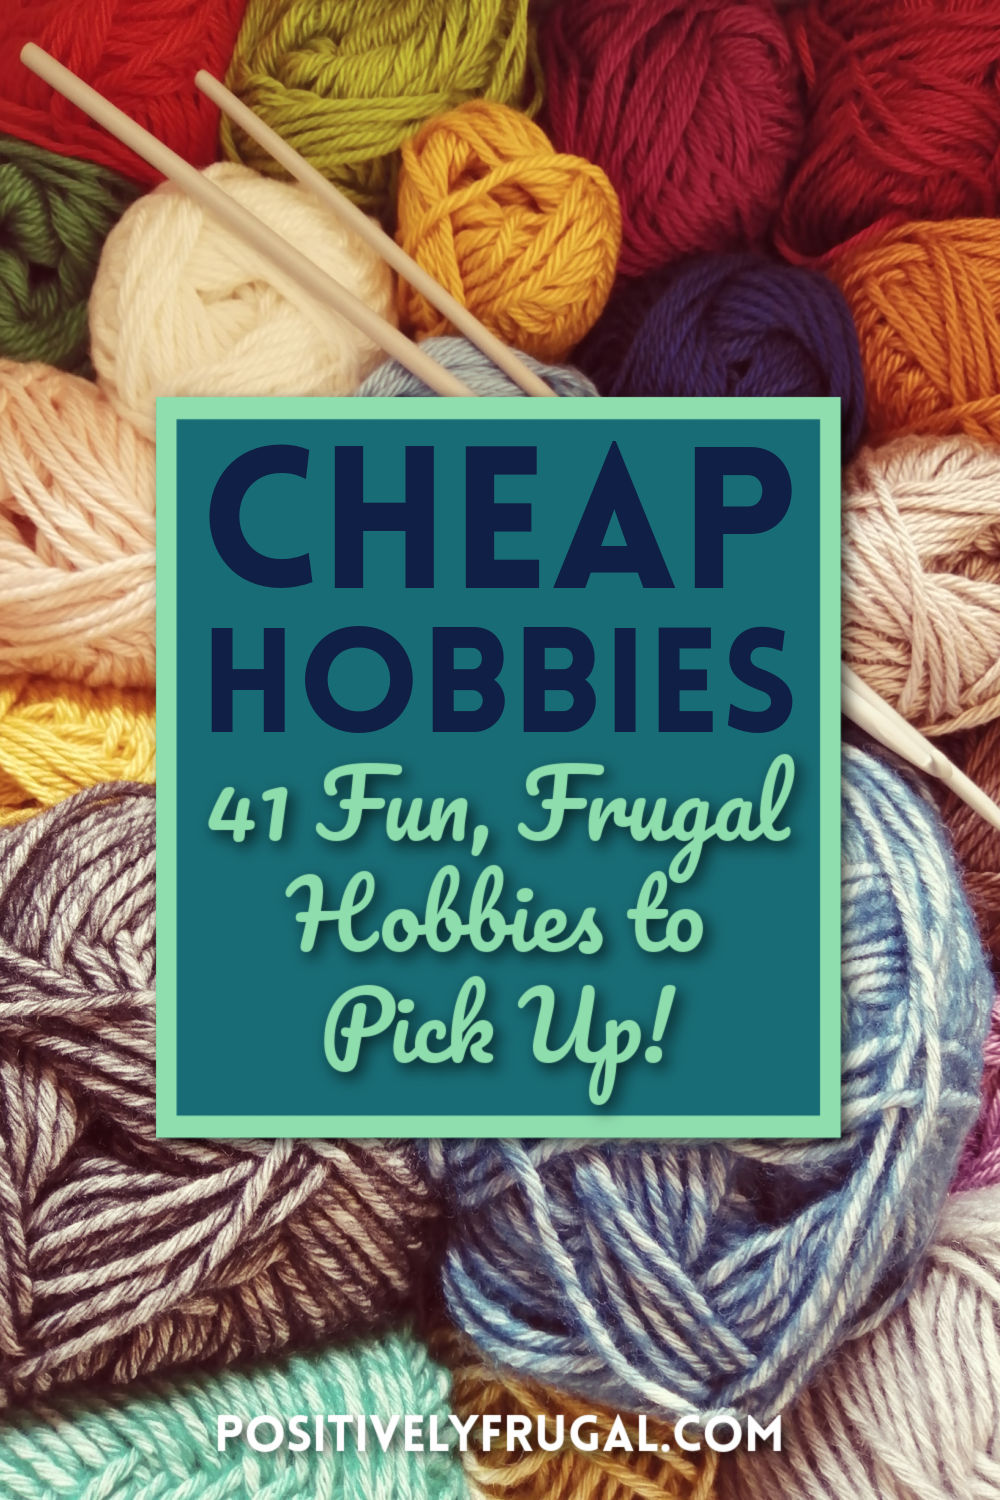 Cheap Hobbies 41 Fun Frugal Hobbies to Pick Up by PositivelyFrugal.com